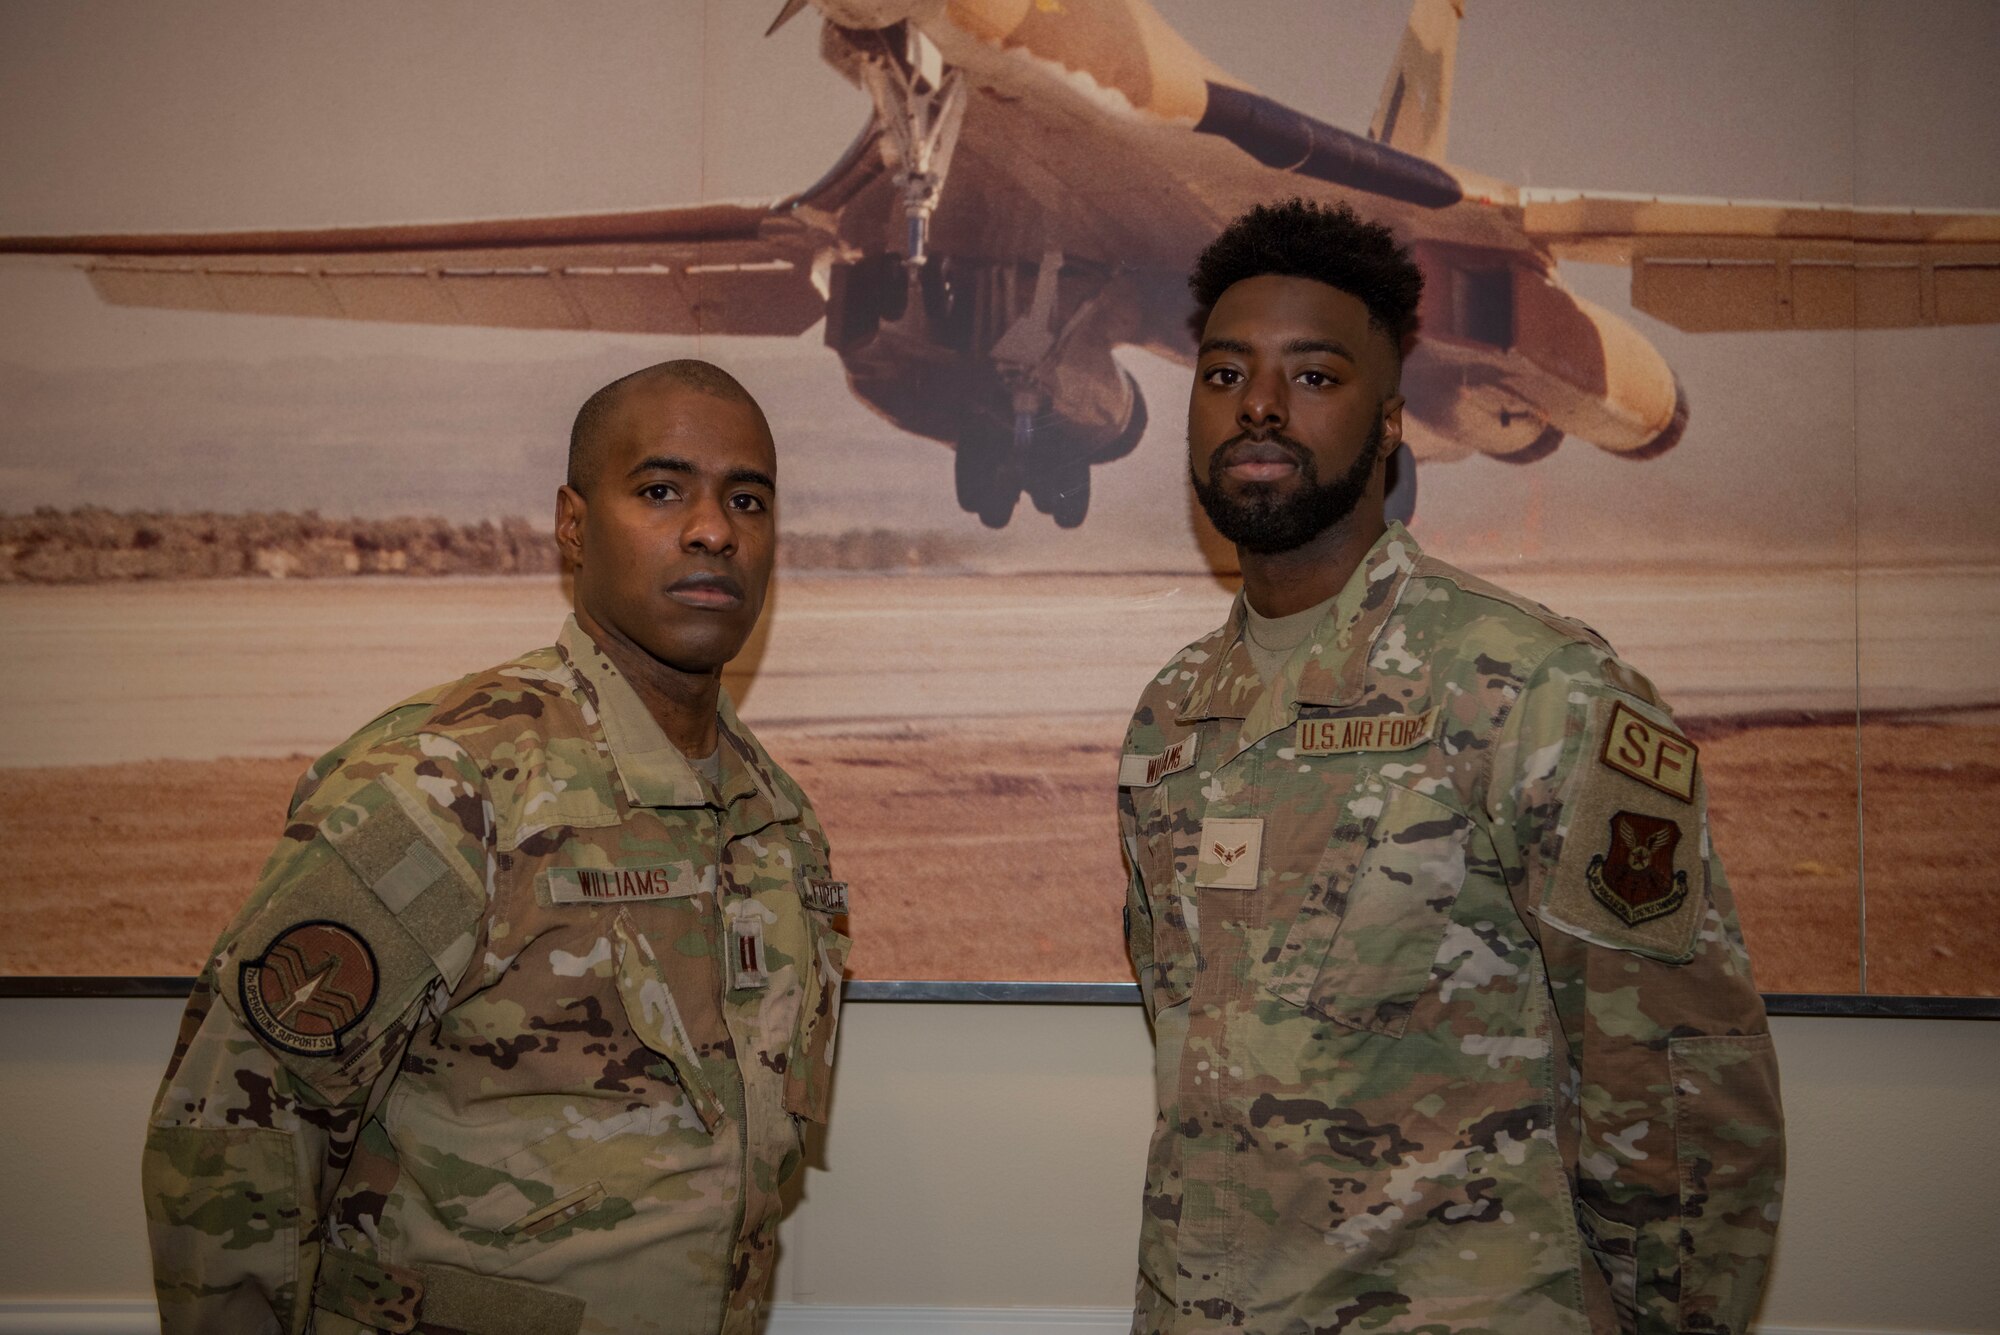 Capt. Jermaine Williams, 7th Operations Support Squadron, weapons and tactics flight commander, and Airman 1st Class Jay Williams, 7th Security Forces Squadron, pose for a photo at Dyess Air Force Base, Texas, Feb. 25, 2022. Capt. Williams has been in the Air Force for 24 years and says that he is glad to be at the same base as his son. Thank you, Capt. and A1C Williams for being a part of what makes Team Dyess America’s LIFT and STRIKE Base! (U.S. Air Force photo by Airman 1st Class Ryan Hayman)